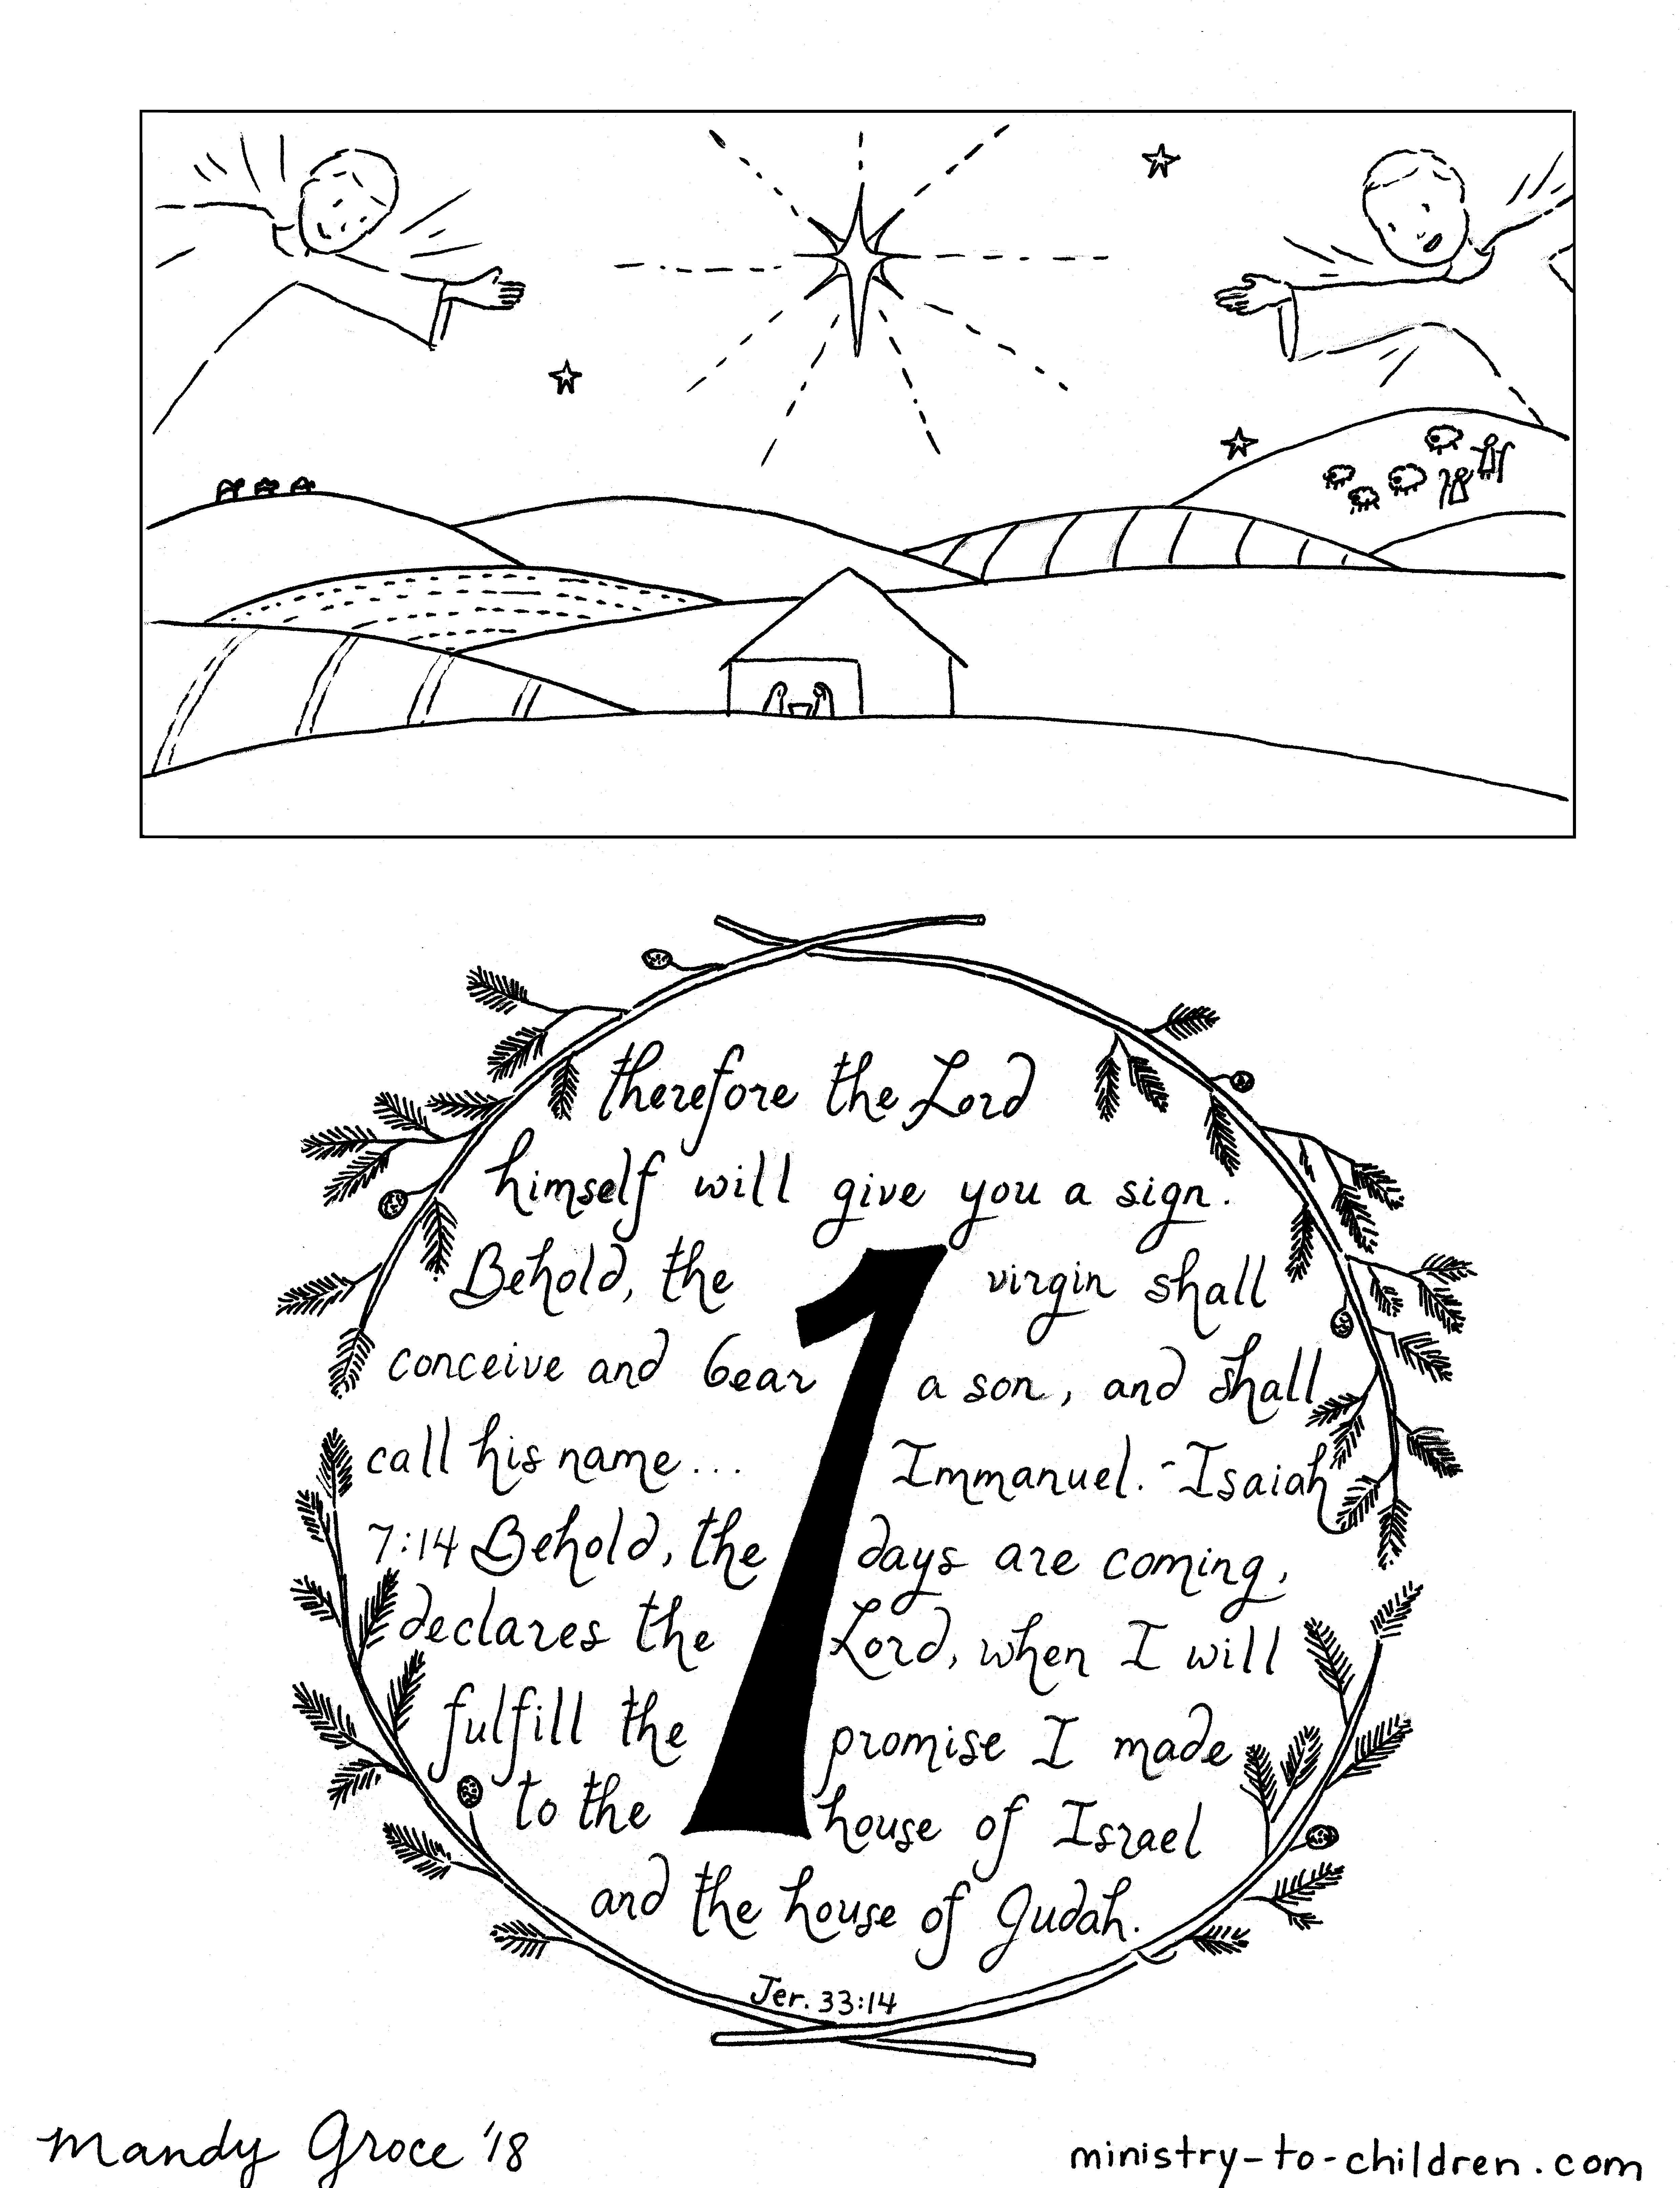 Advent coloring pages activities for kids â sunday school